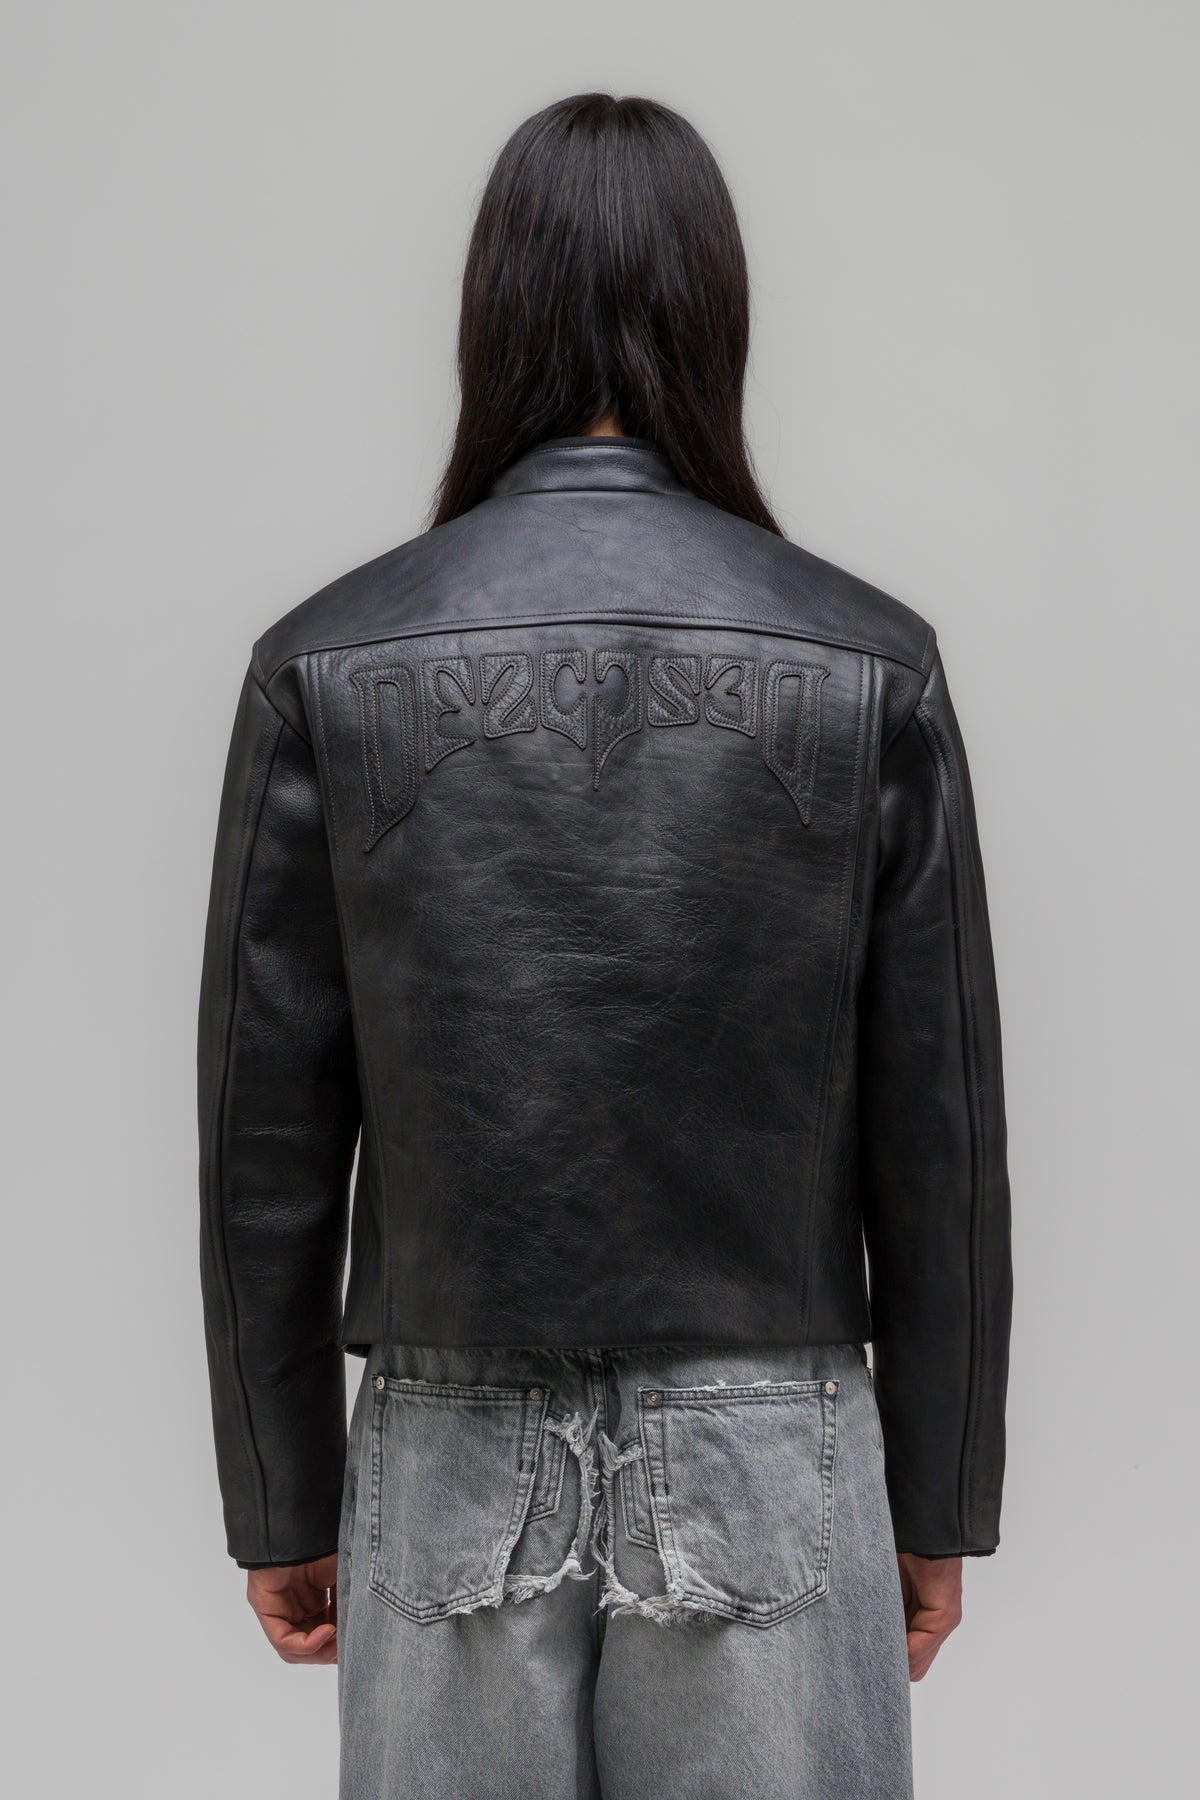 "ATTRITION" LEATHER JACKET